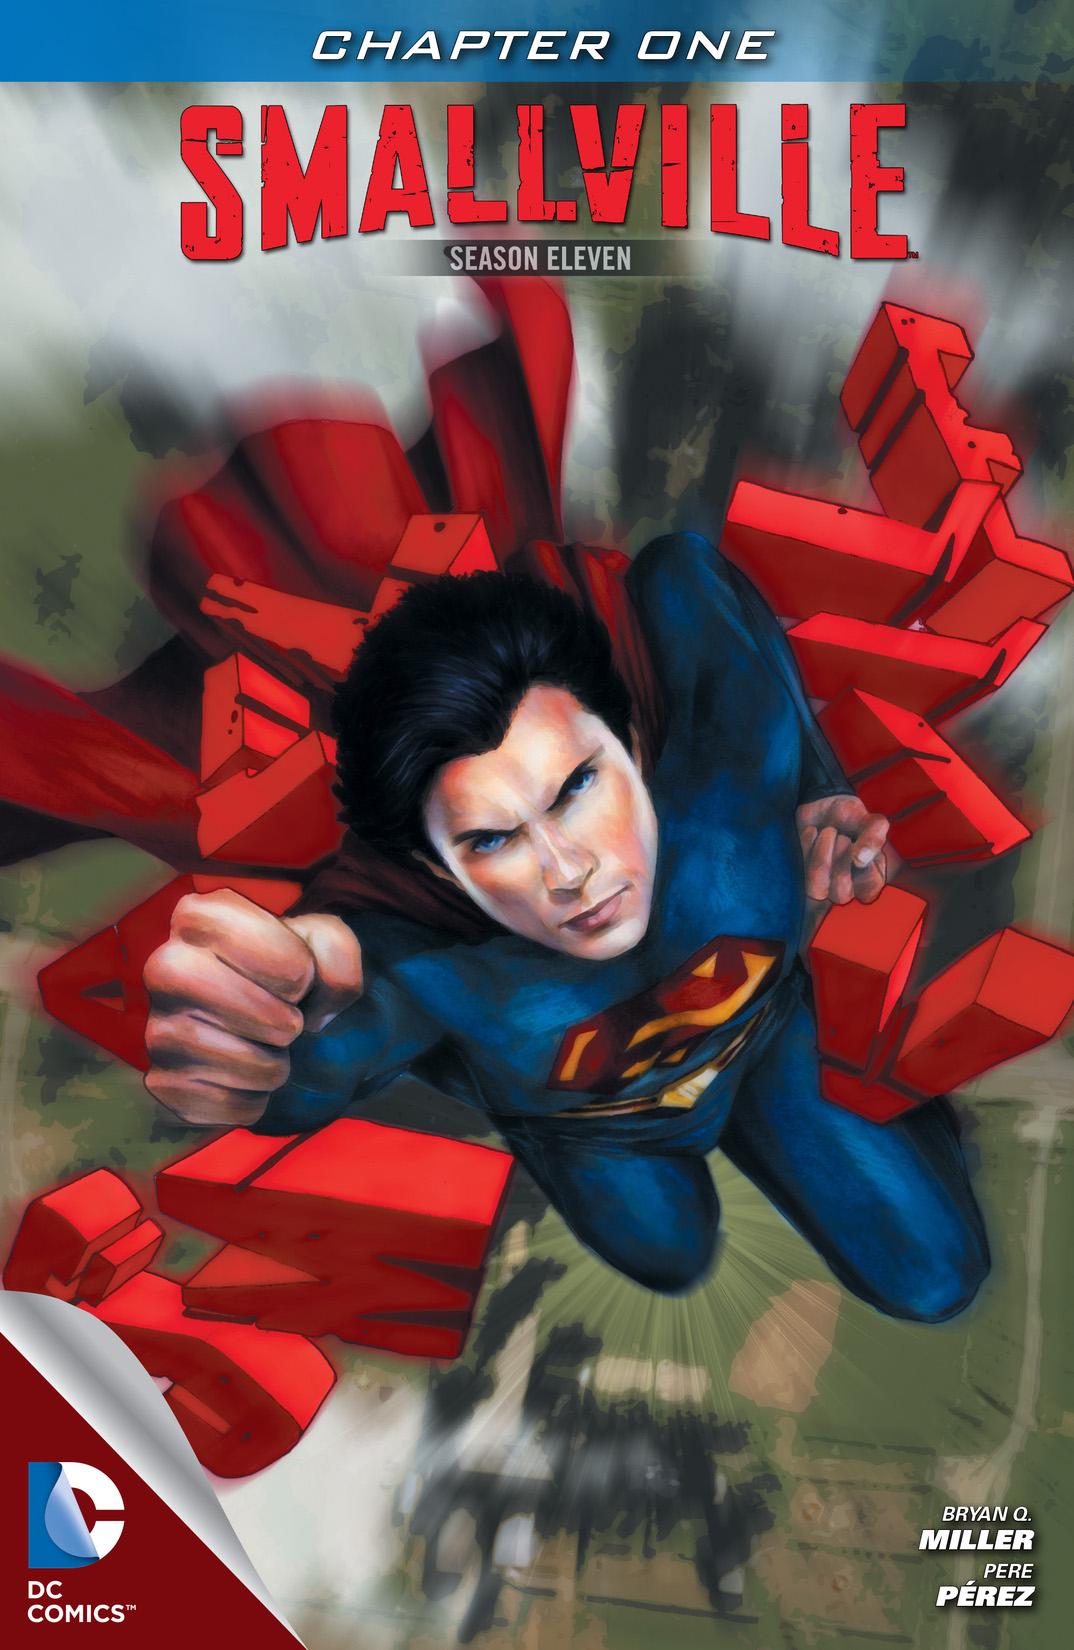 Smallville Season 11 #1 preview images